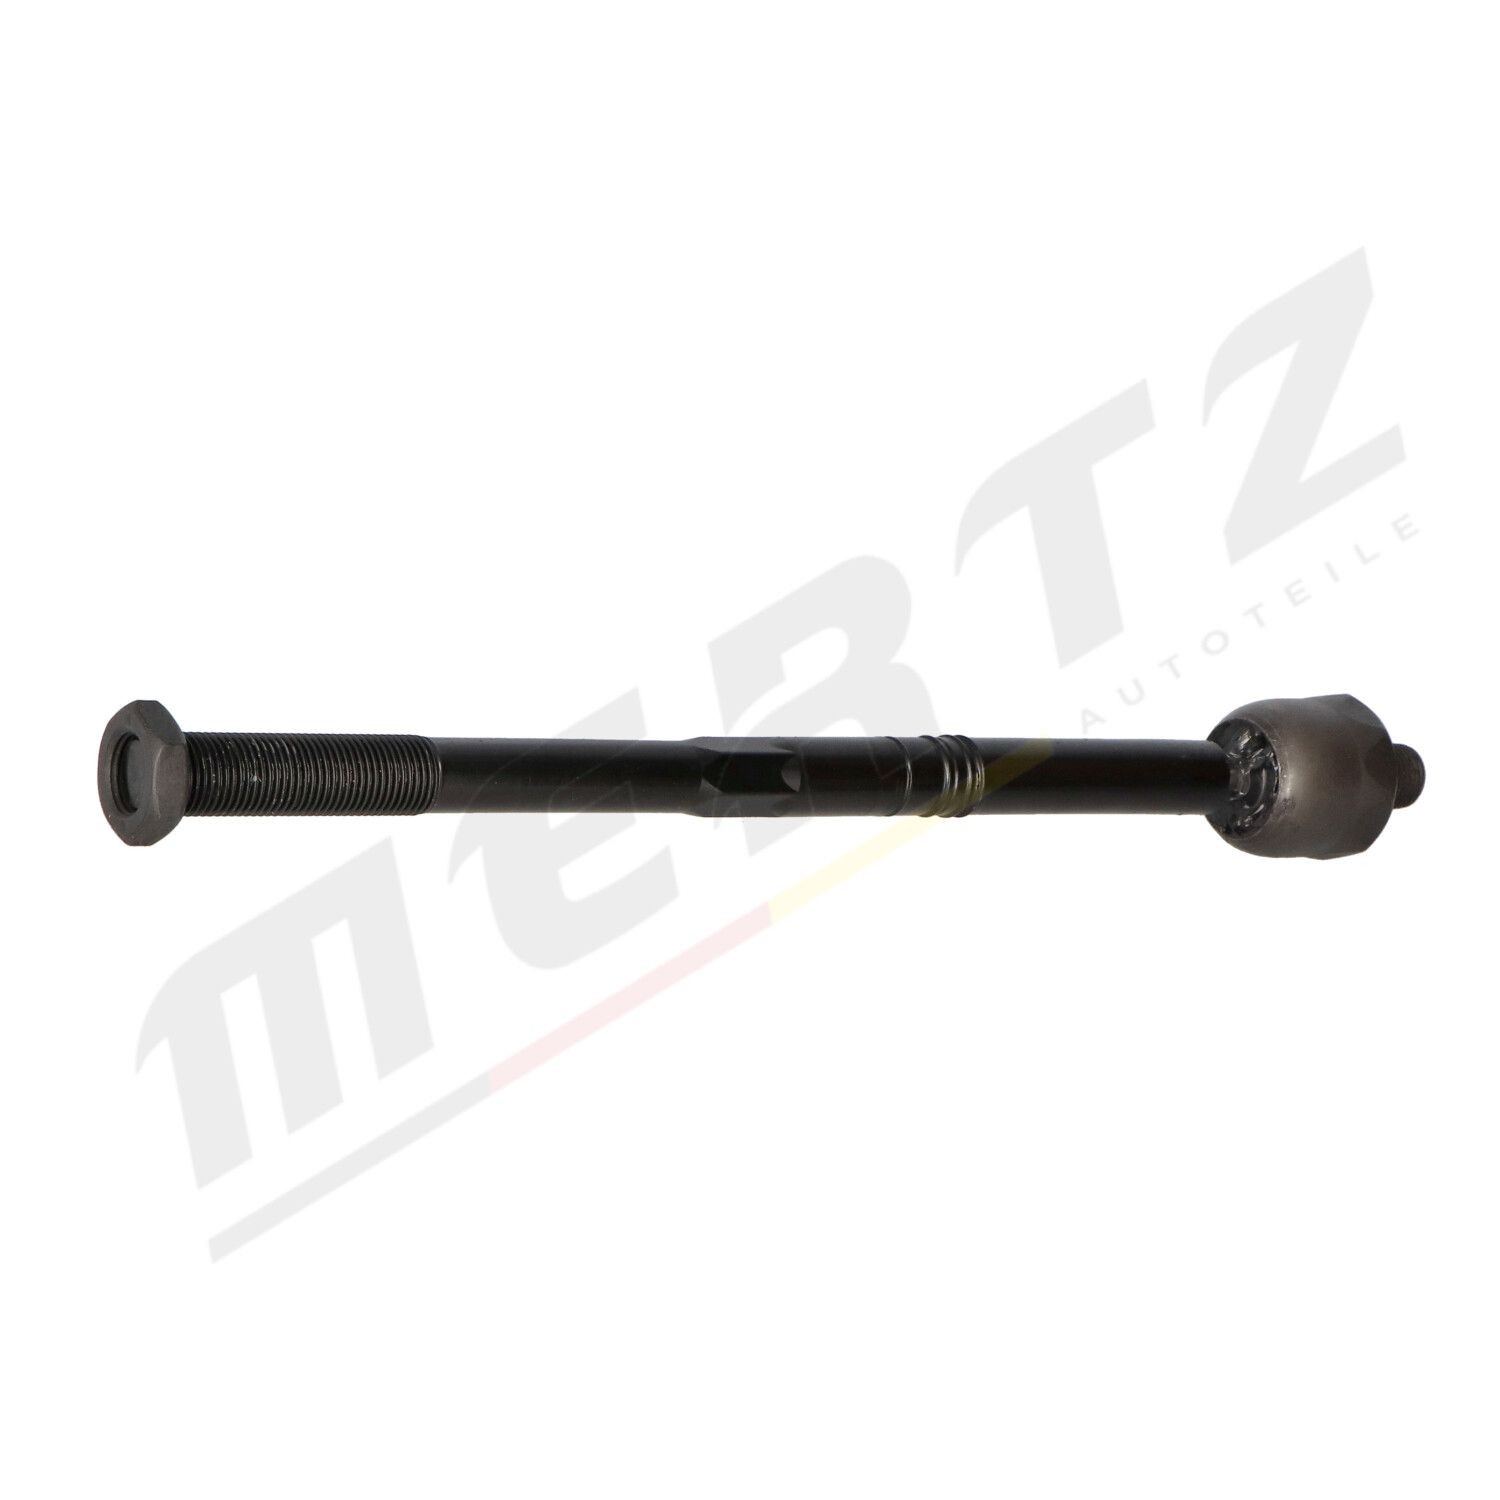 M-S0196 Steering rack end M-S0196 MERTZ Front Axle Left, Front Axle Right, 311 mm